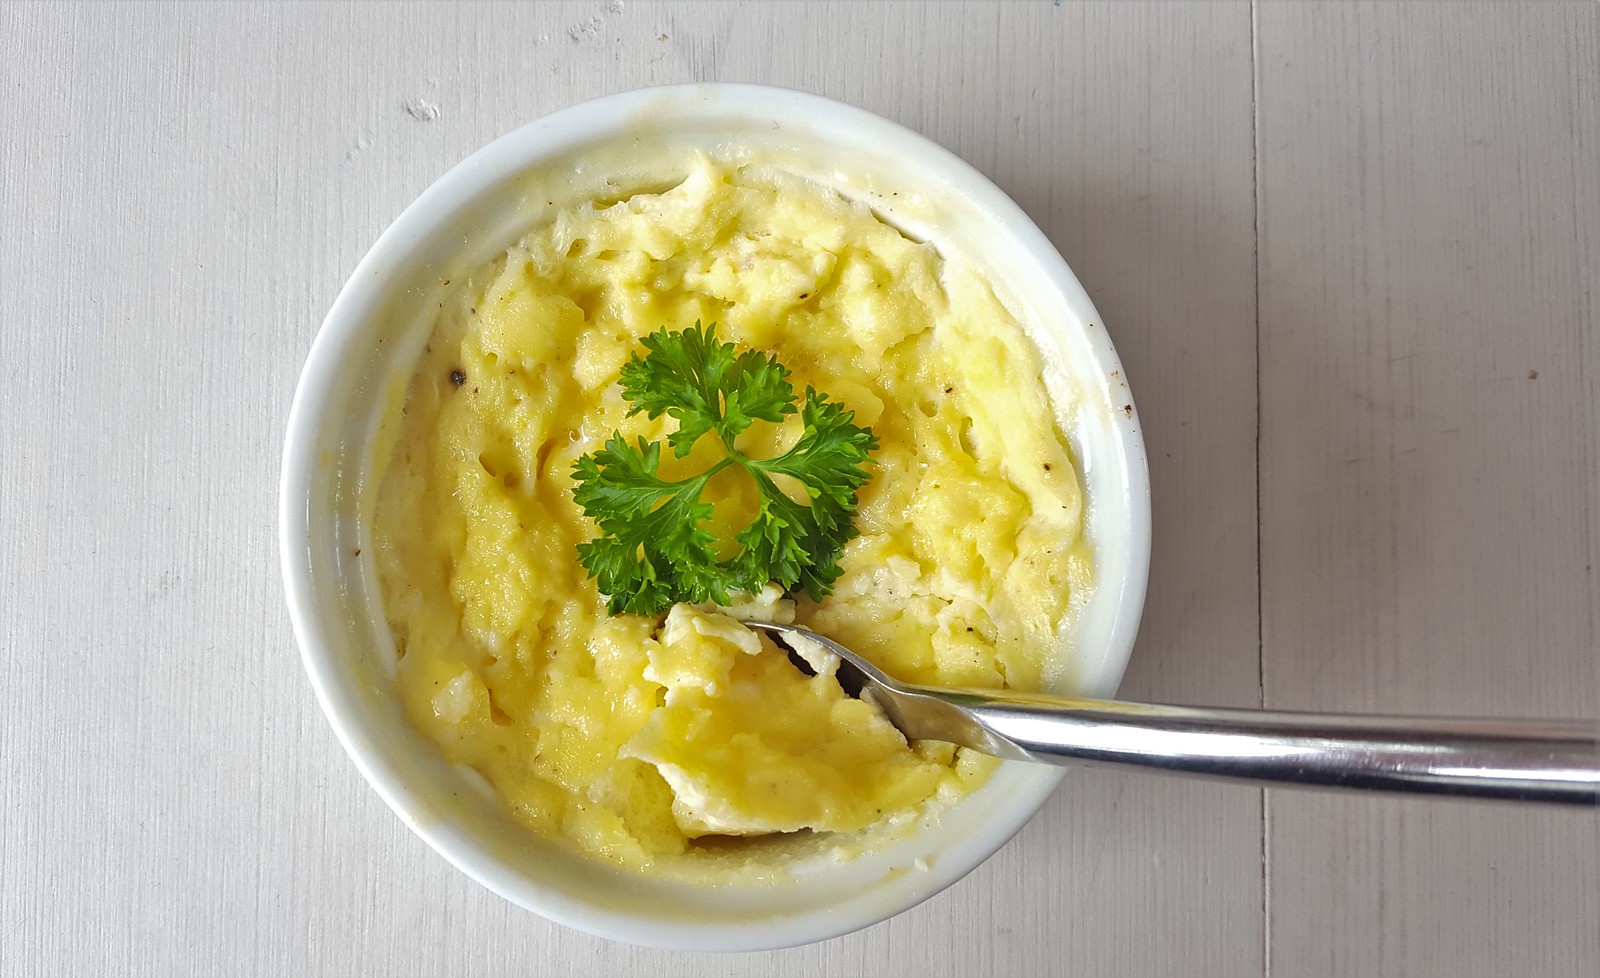 Recipe for Homemade Microwave Scrambled Eggs